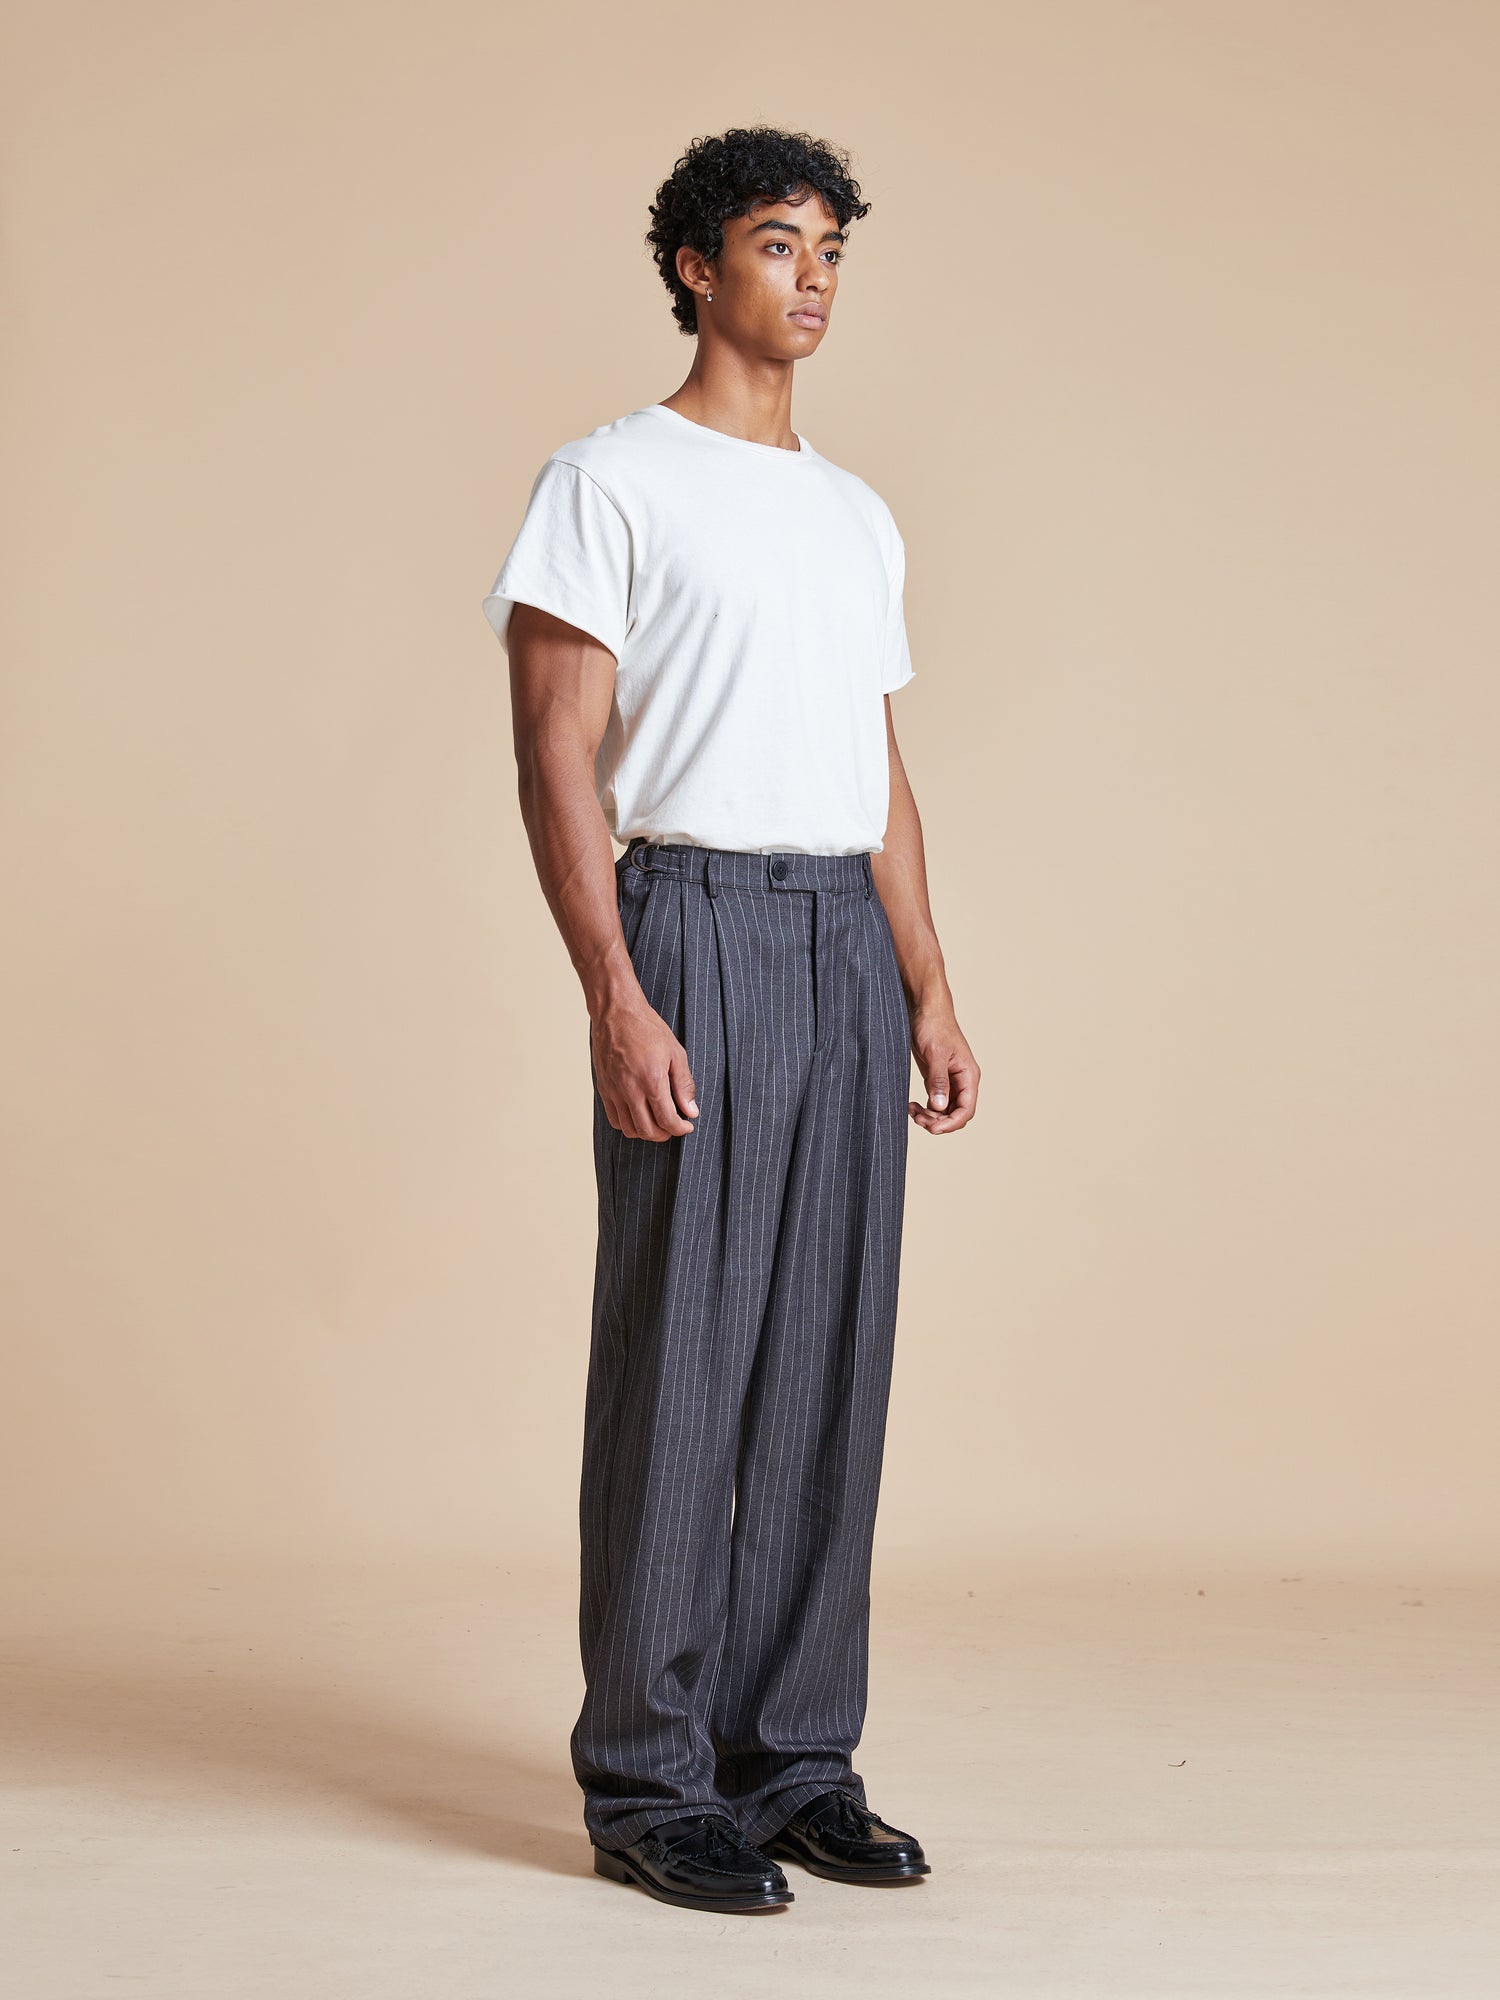 The model is wearing a white t - shirt and grey Found Pinstripe Pleated Trousers.